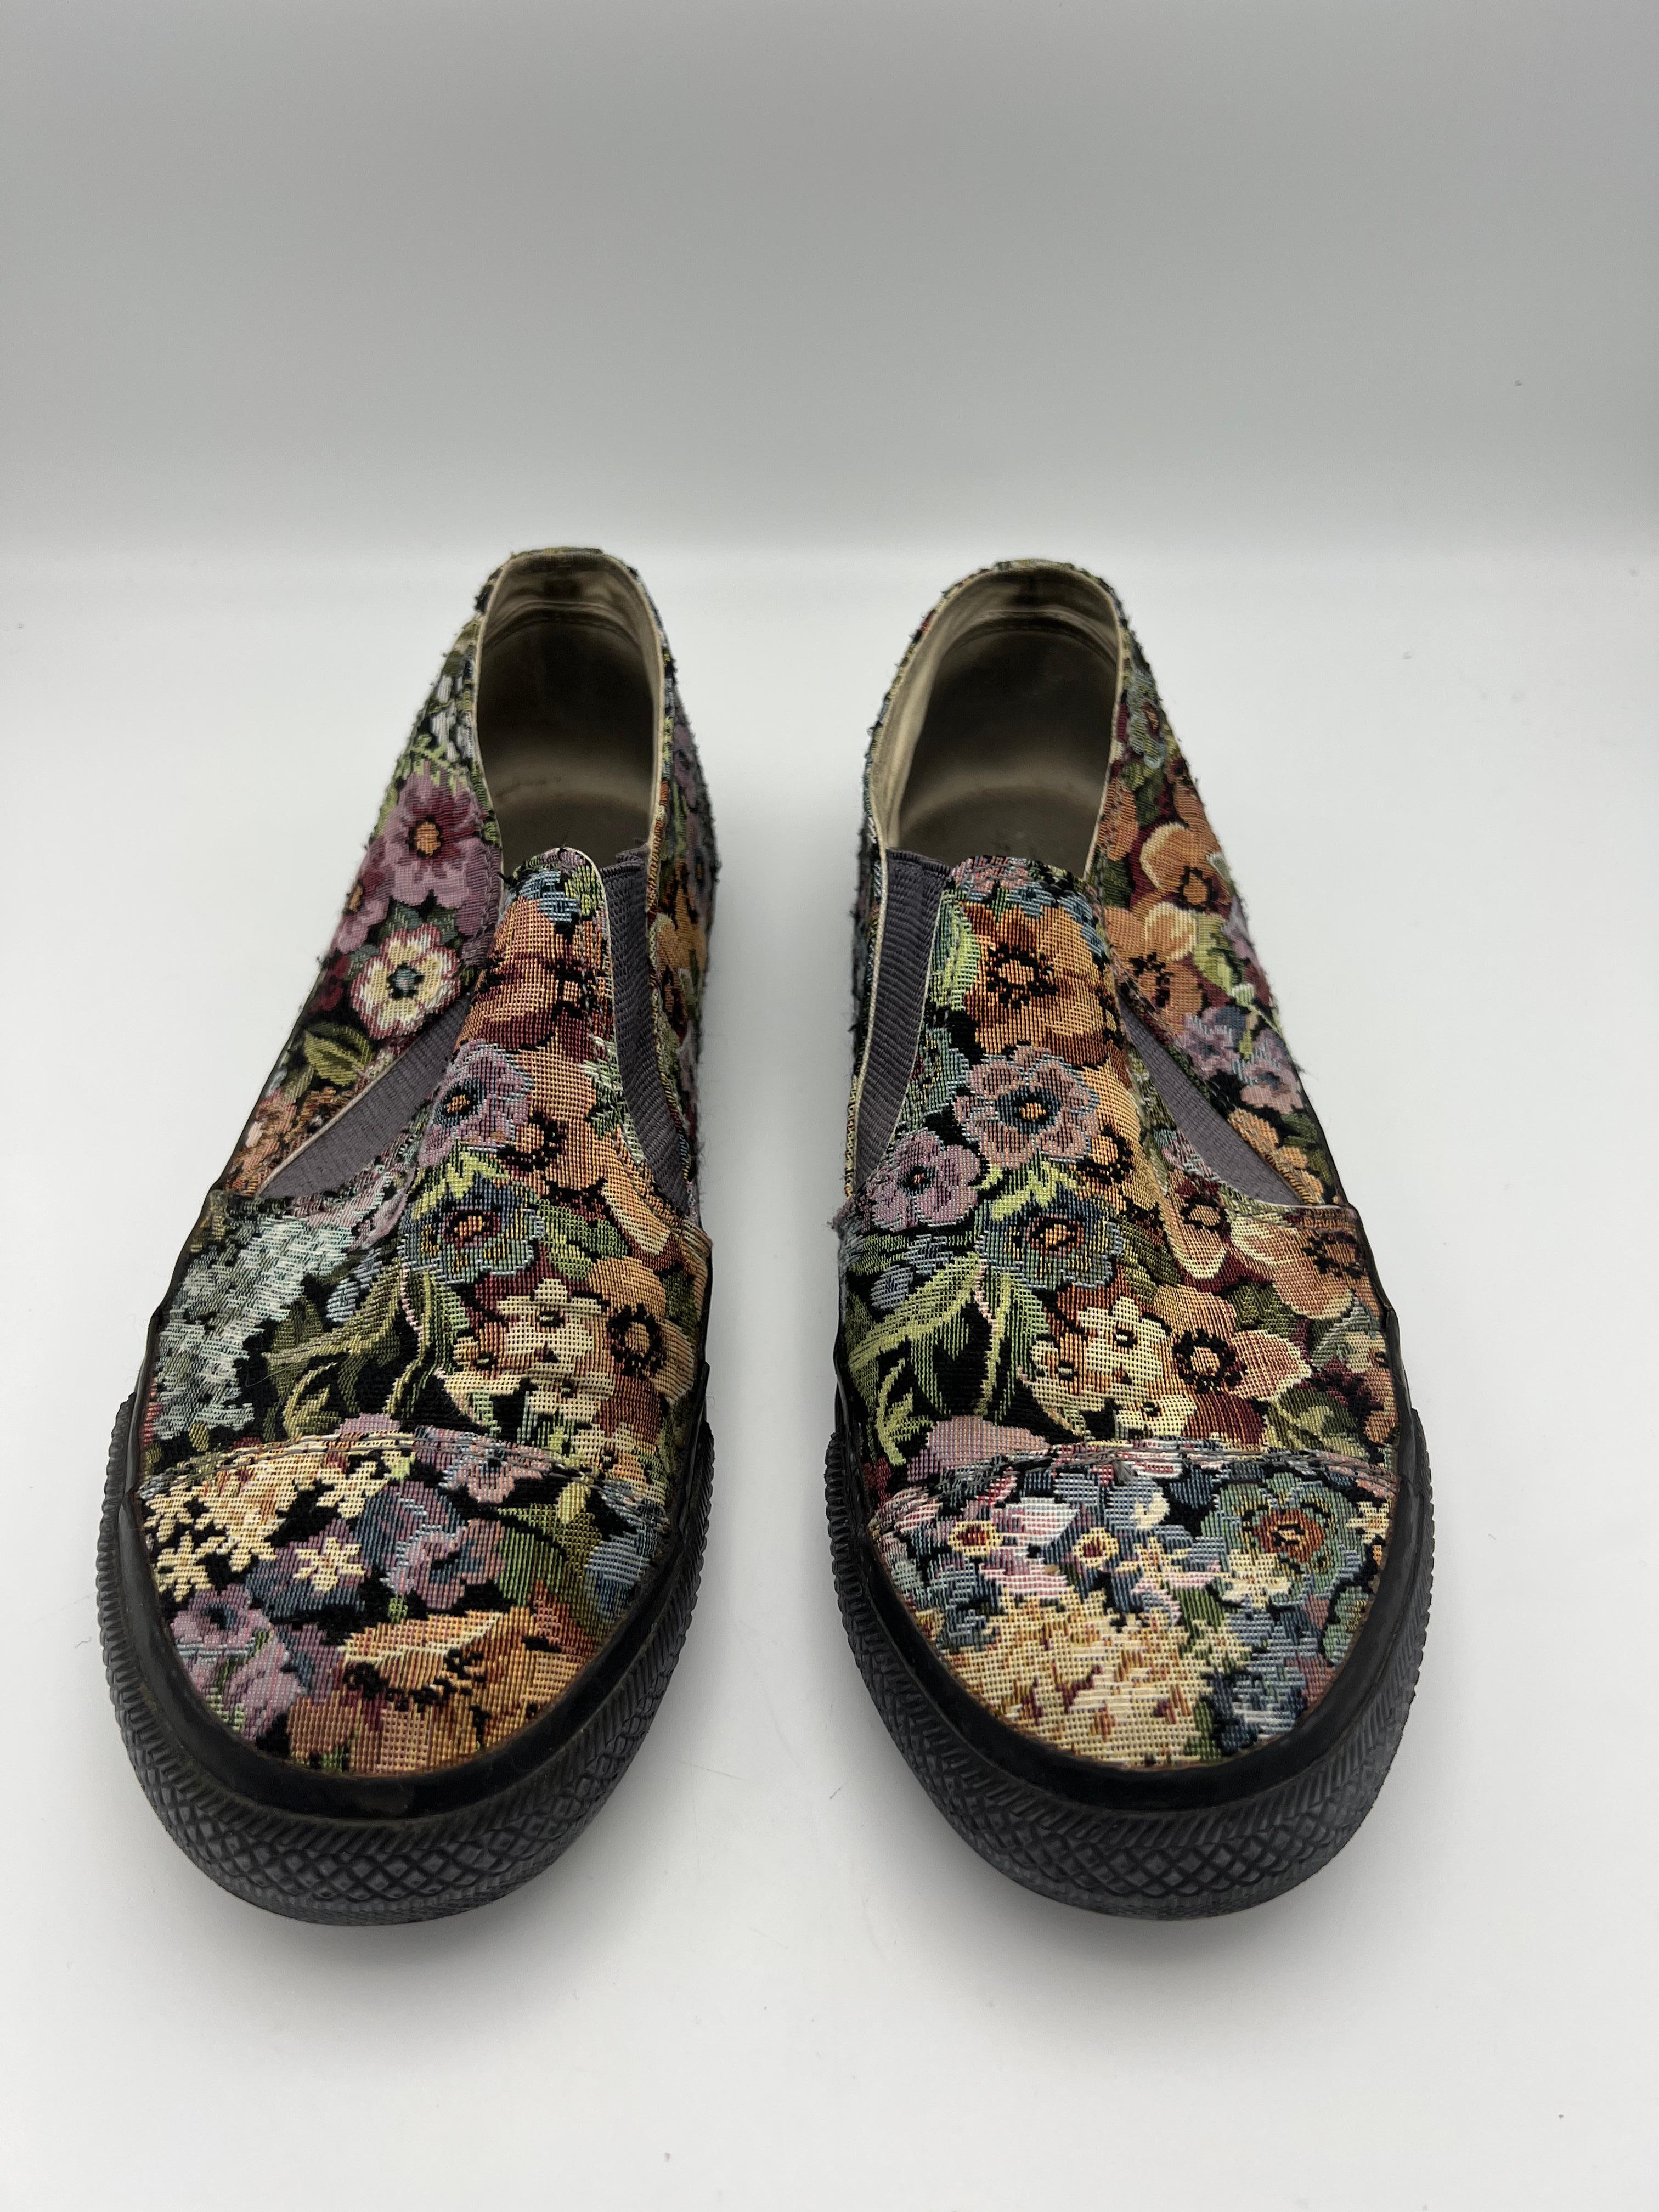 Product details:

The shoes feature multicolored floral pattern with embroidered finish and black sole.